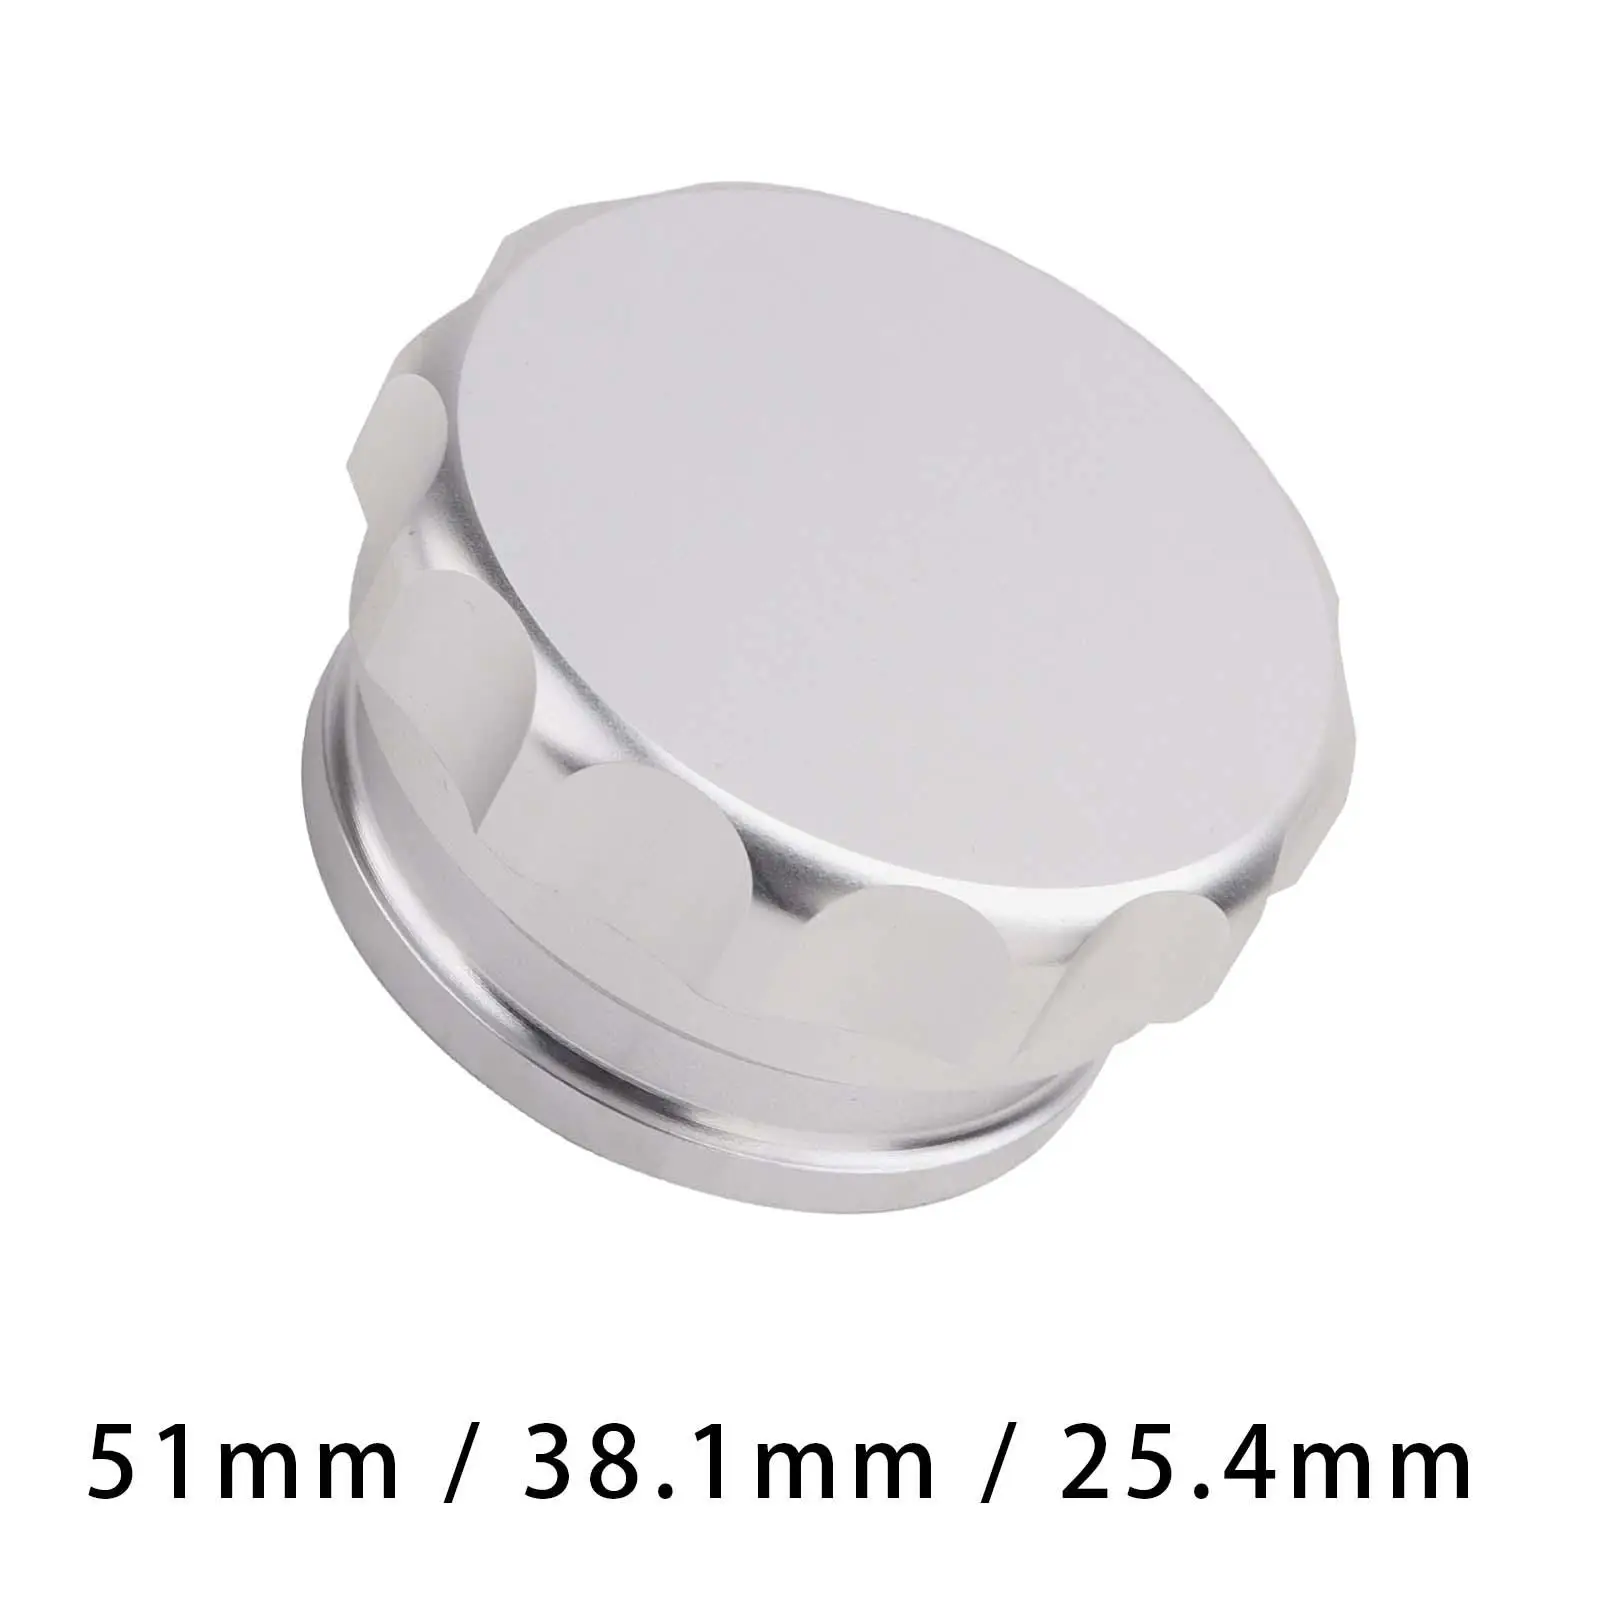 Weldable filler cap, easy to install aluminum alloy car accessories, high